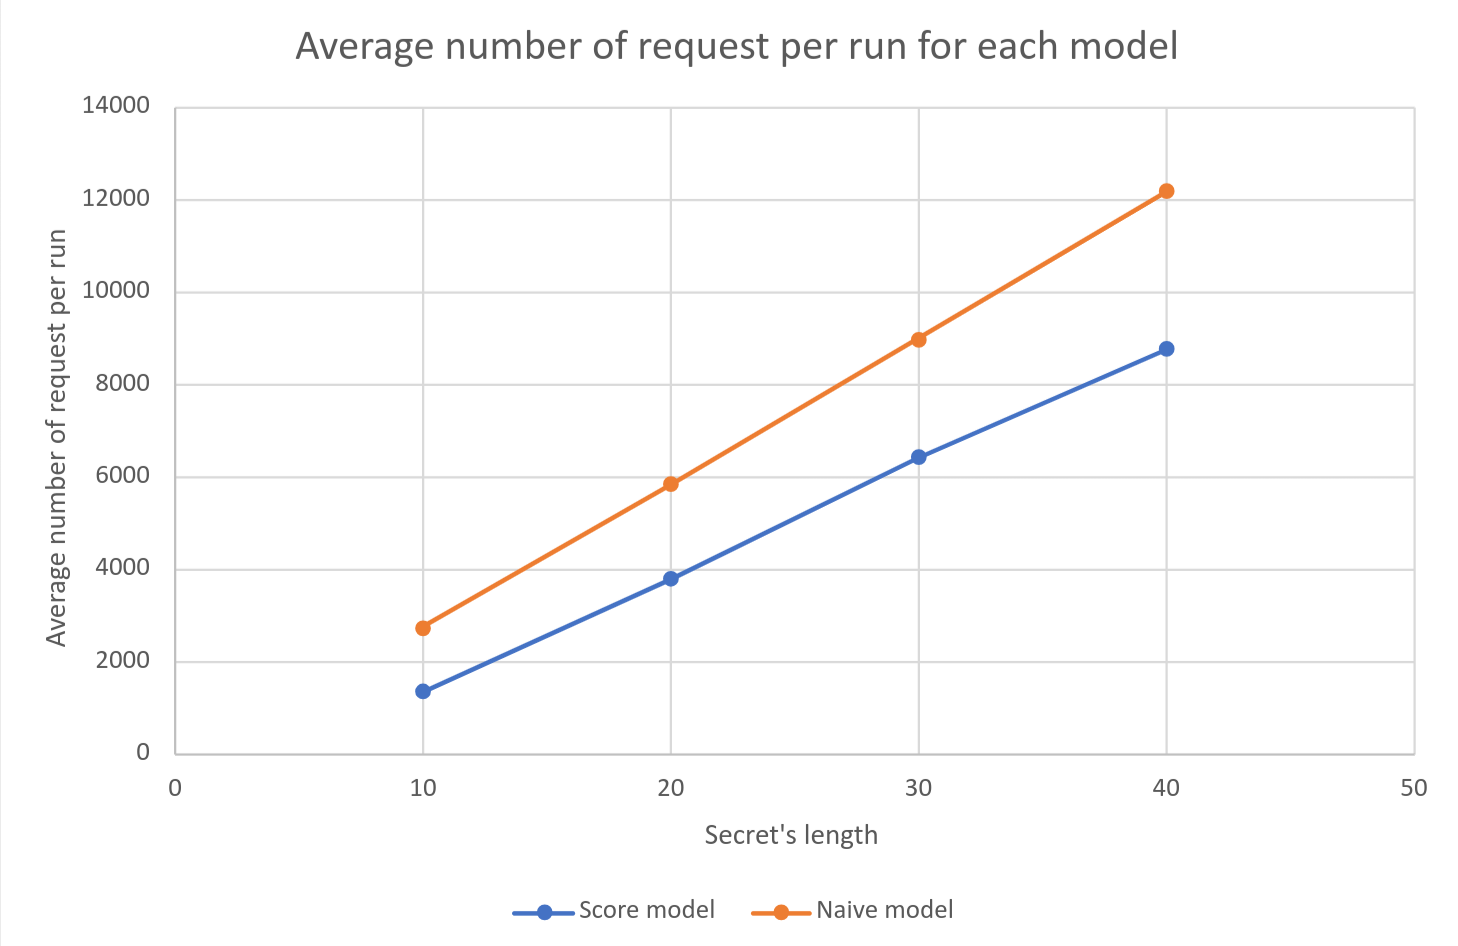 Figure 11: Average number of requests per run for the two models